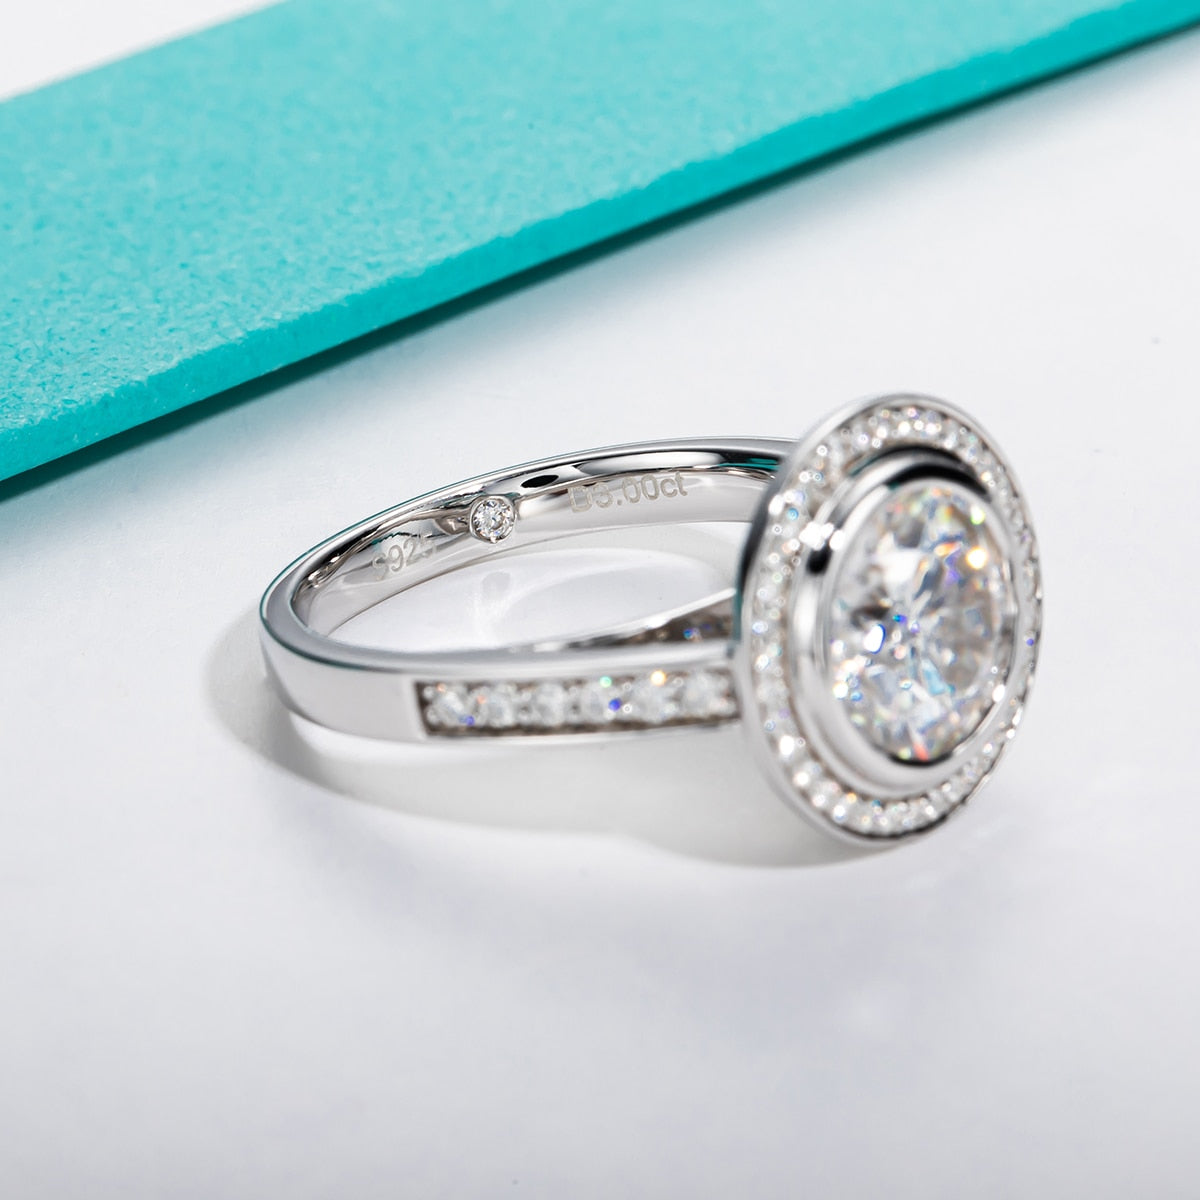 A vintage style ring with 3CT moissanite bezel set surrounded with a halo and pave band.